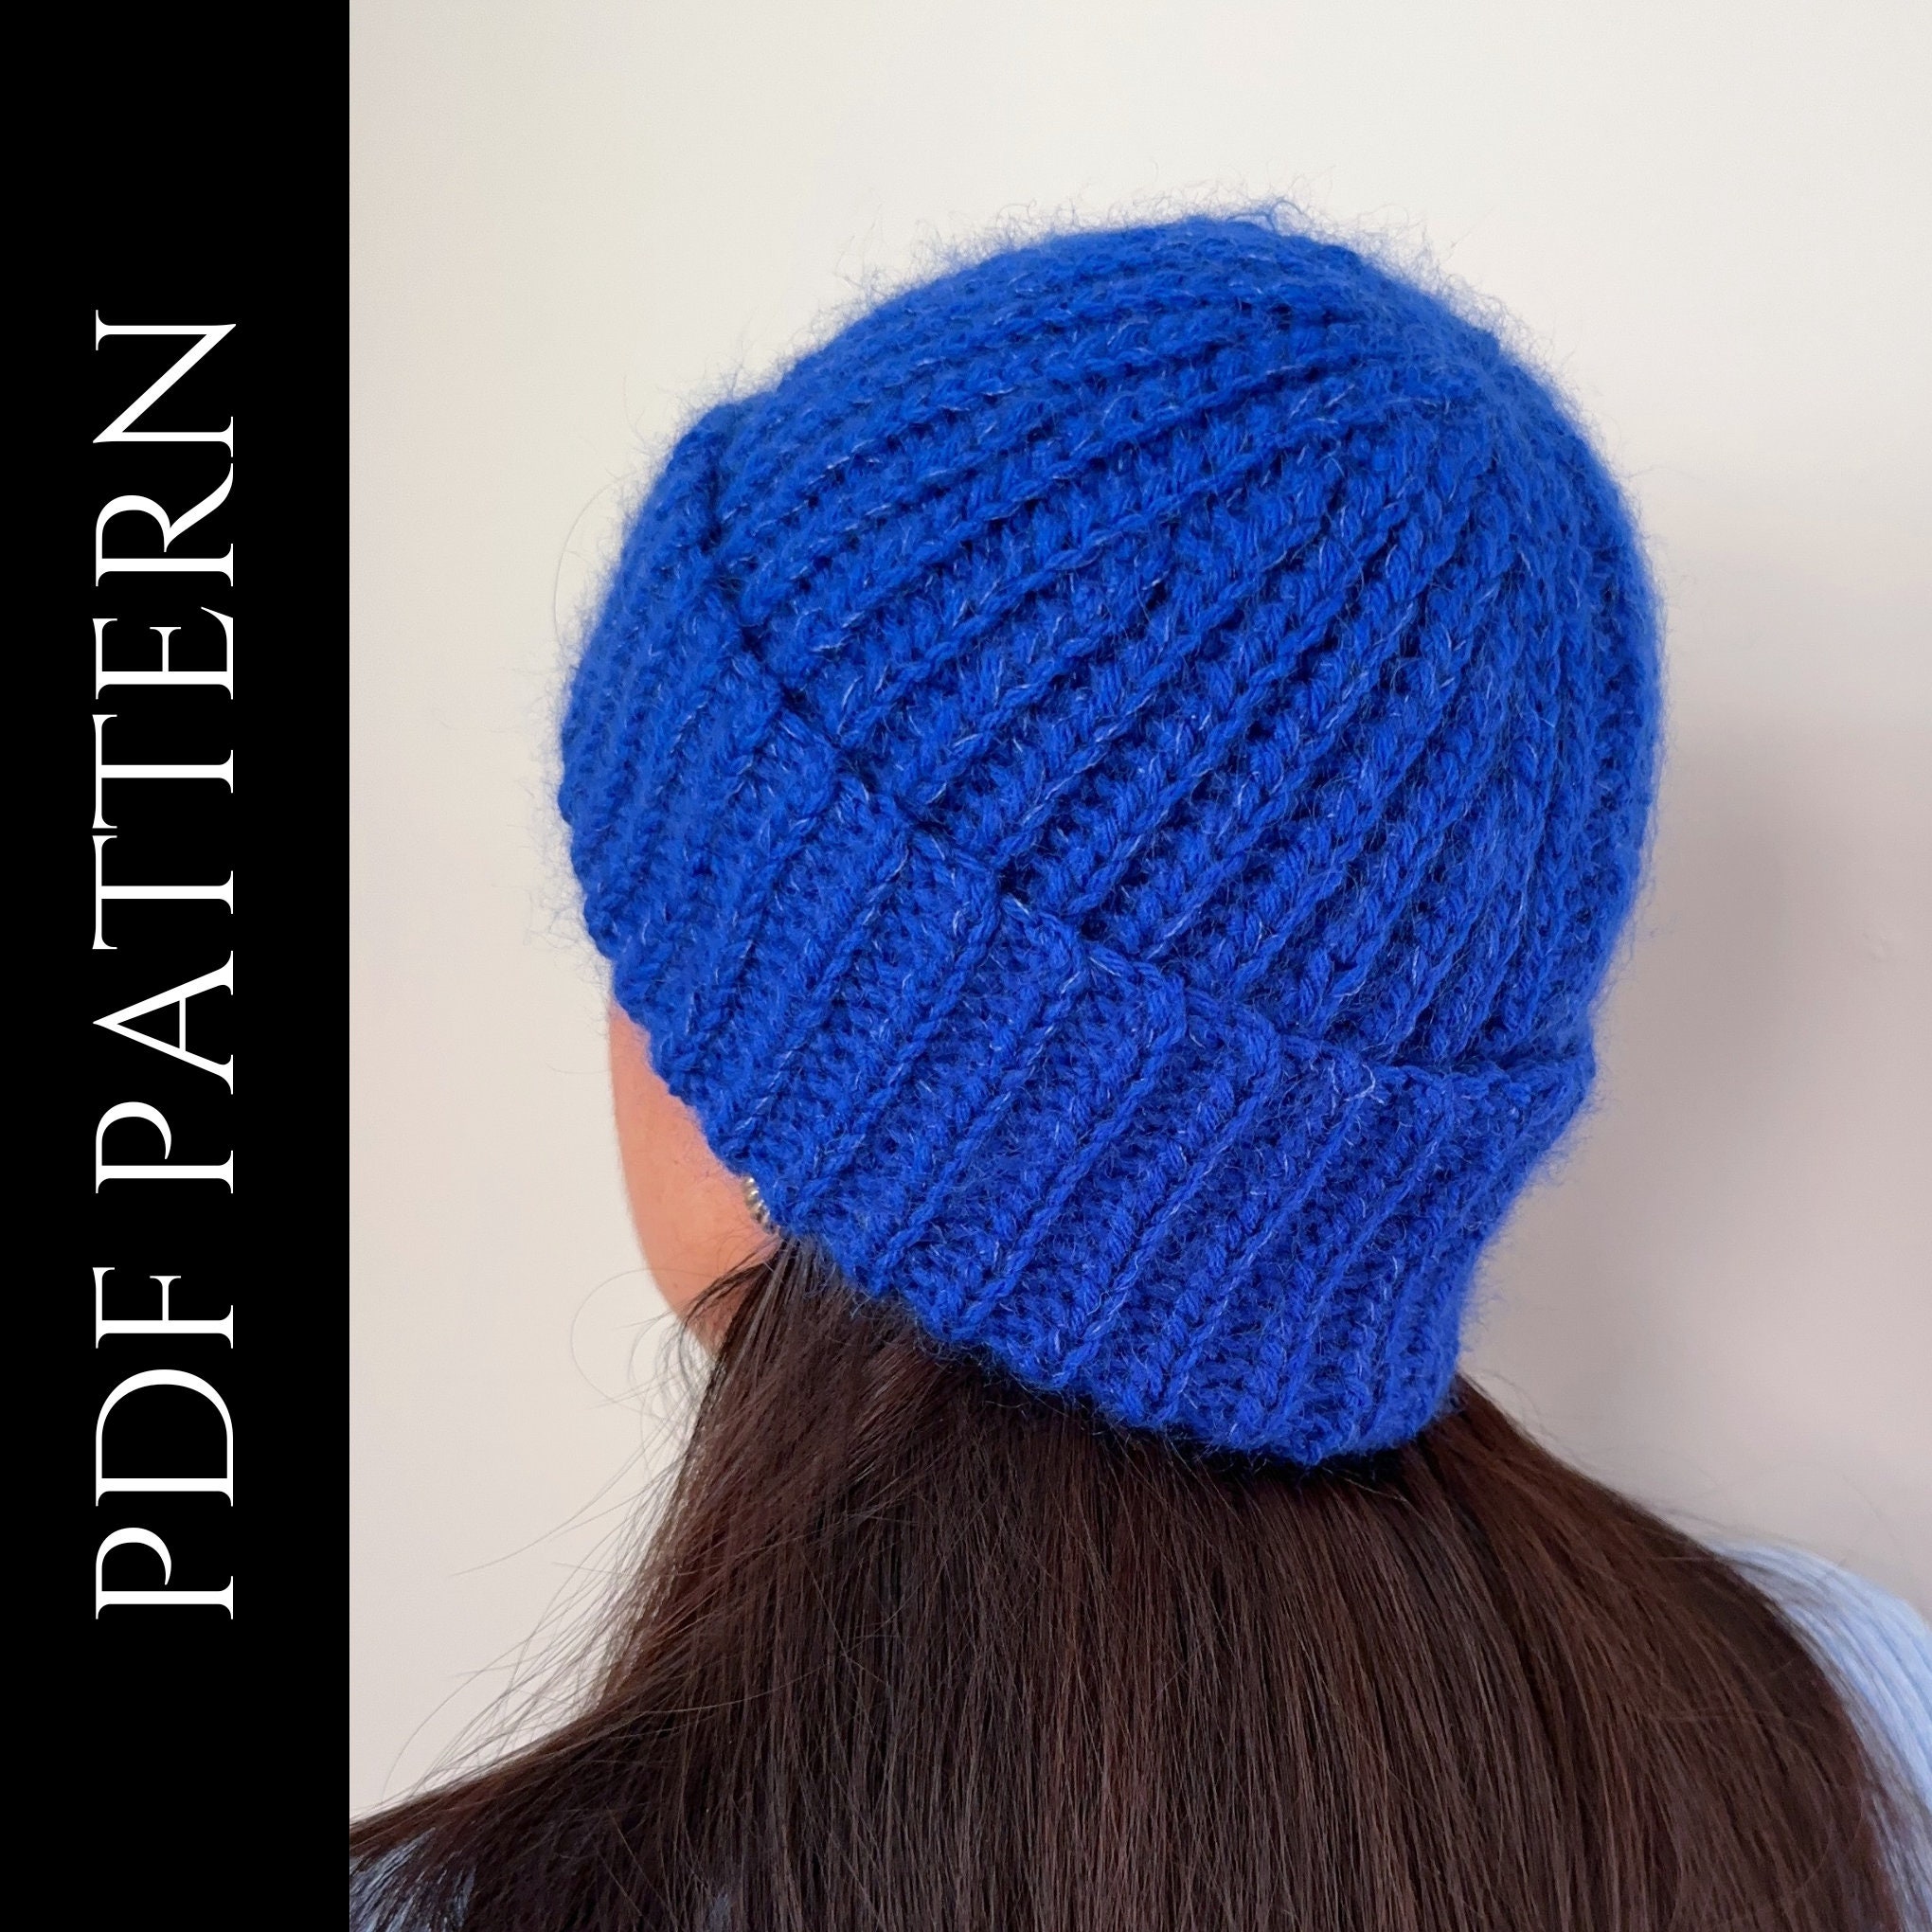 PDF File for Crochet Pattern english, Clover Beanie, Pictures and